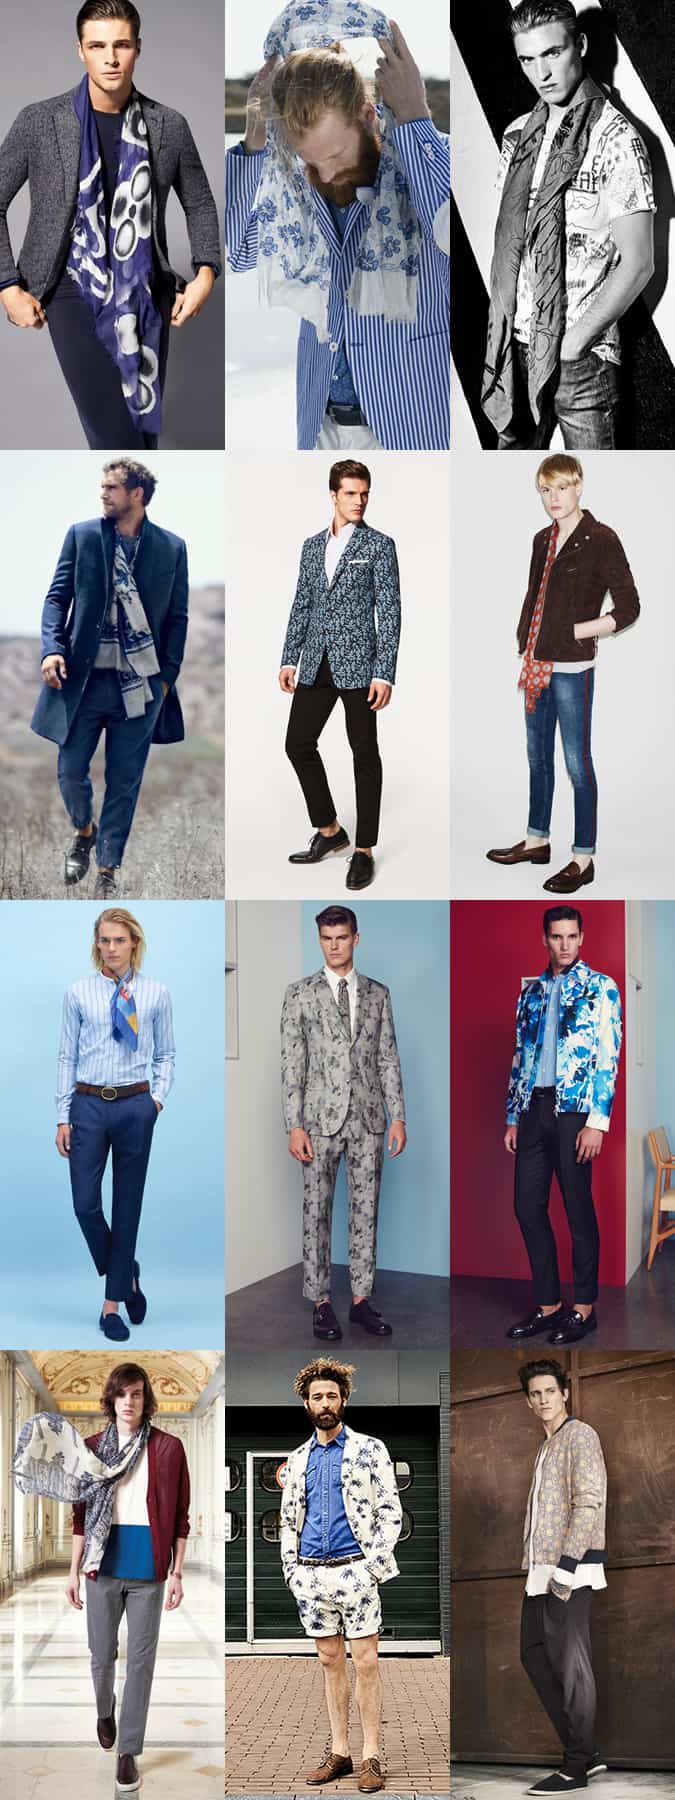 Men's Printed and Graphic Jackets, Tailoring And Scarves Outfit Inspiration